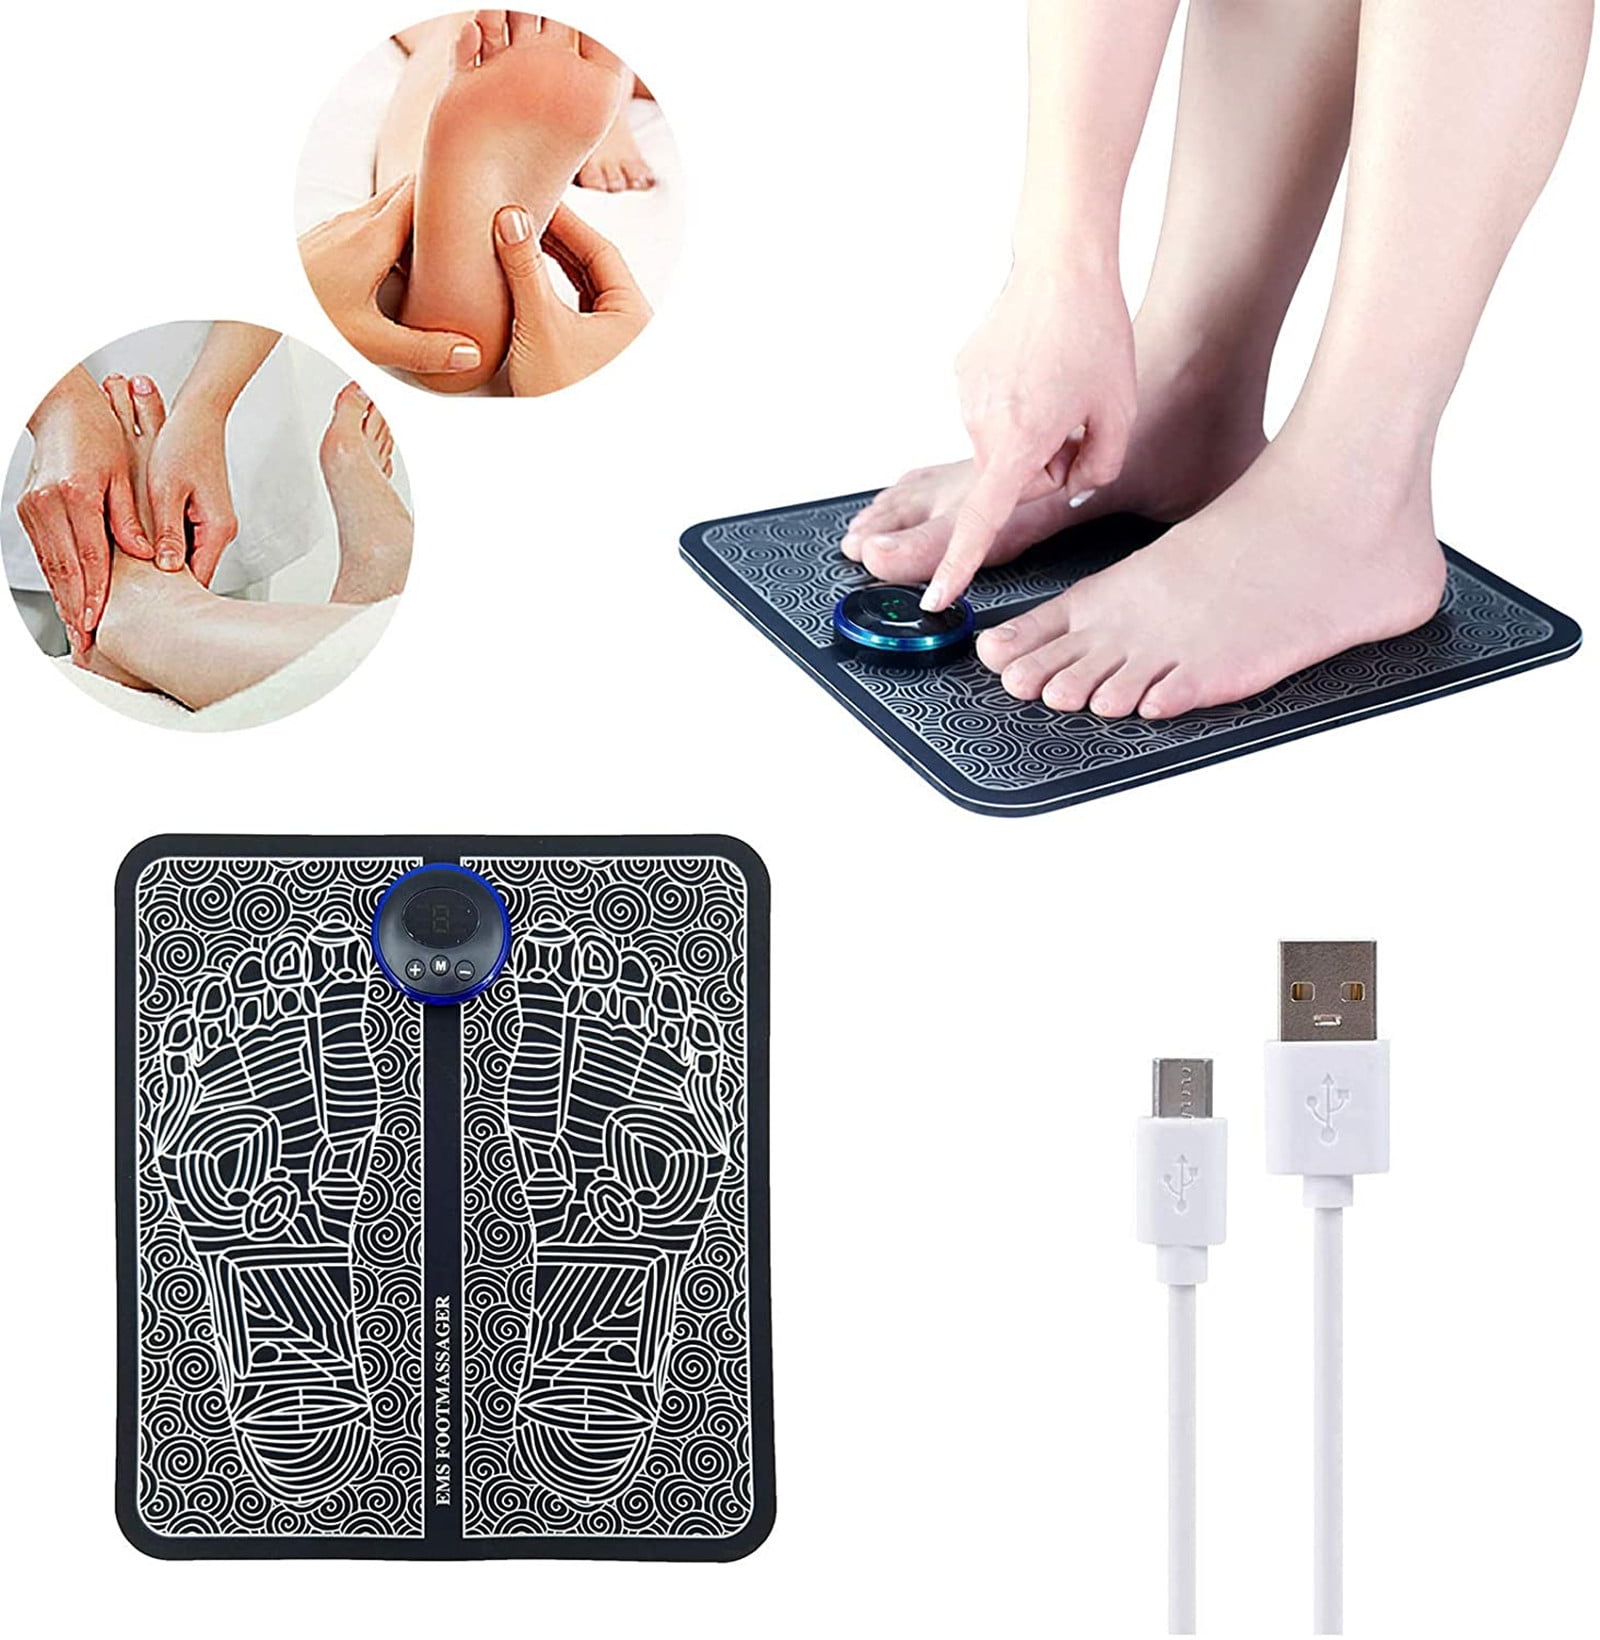 QUINEAR Foot Stimulator, EMS Foot Massager and Electronic Stimulator with  TENS U 